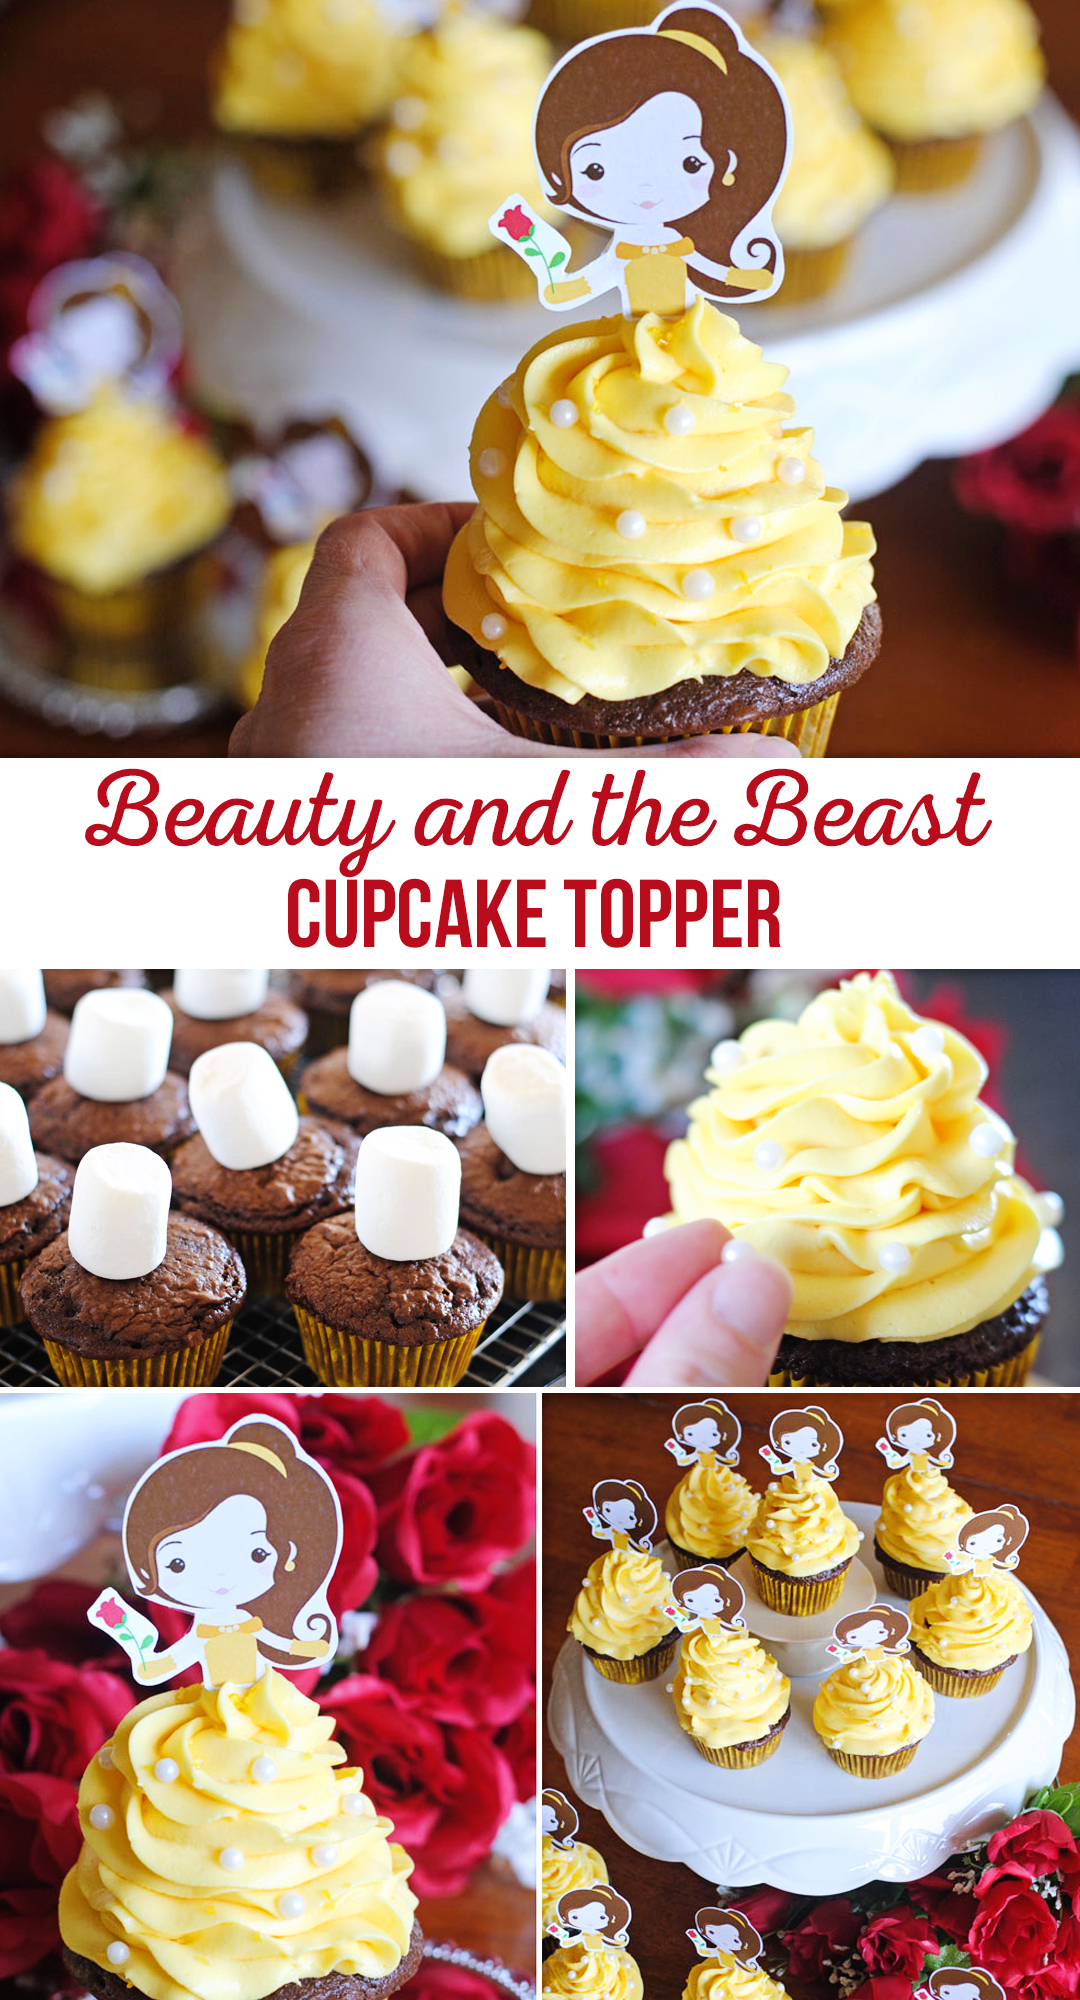 Beauty and the Beast Cupcake Topper